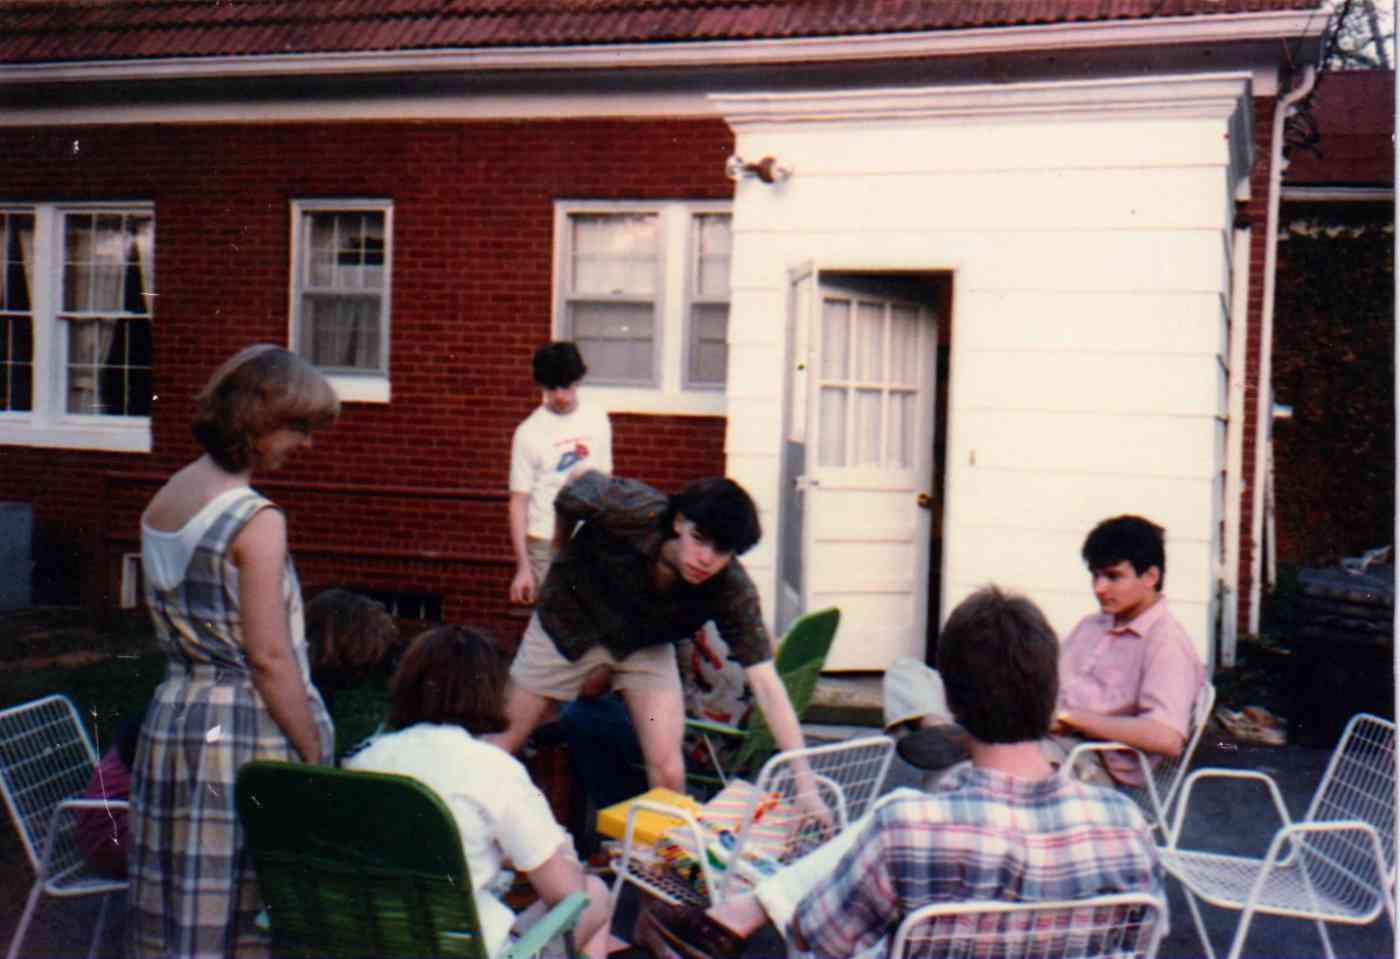 Bev's Birthday party, Chattanooga, Tennessee, 1985